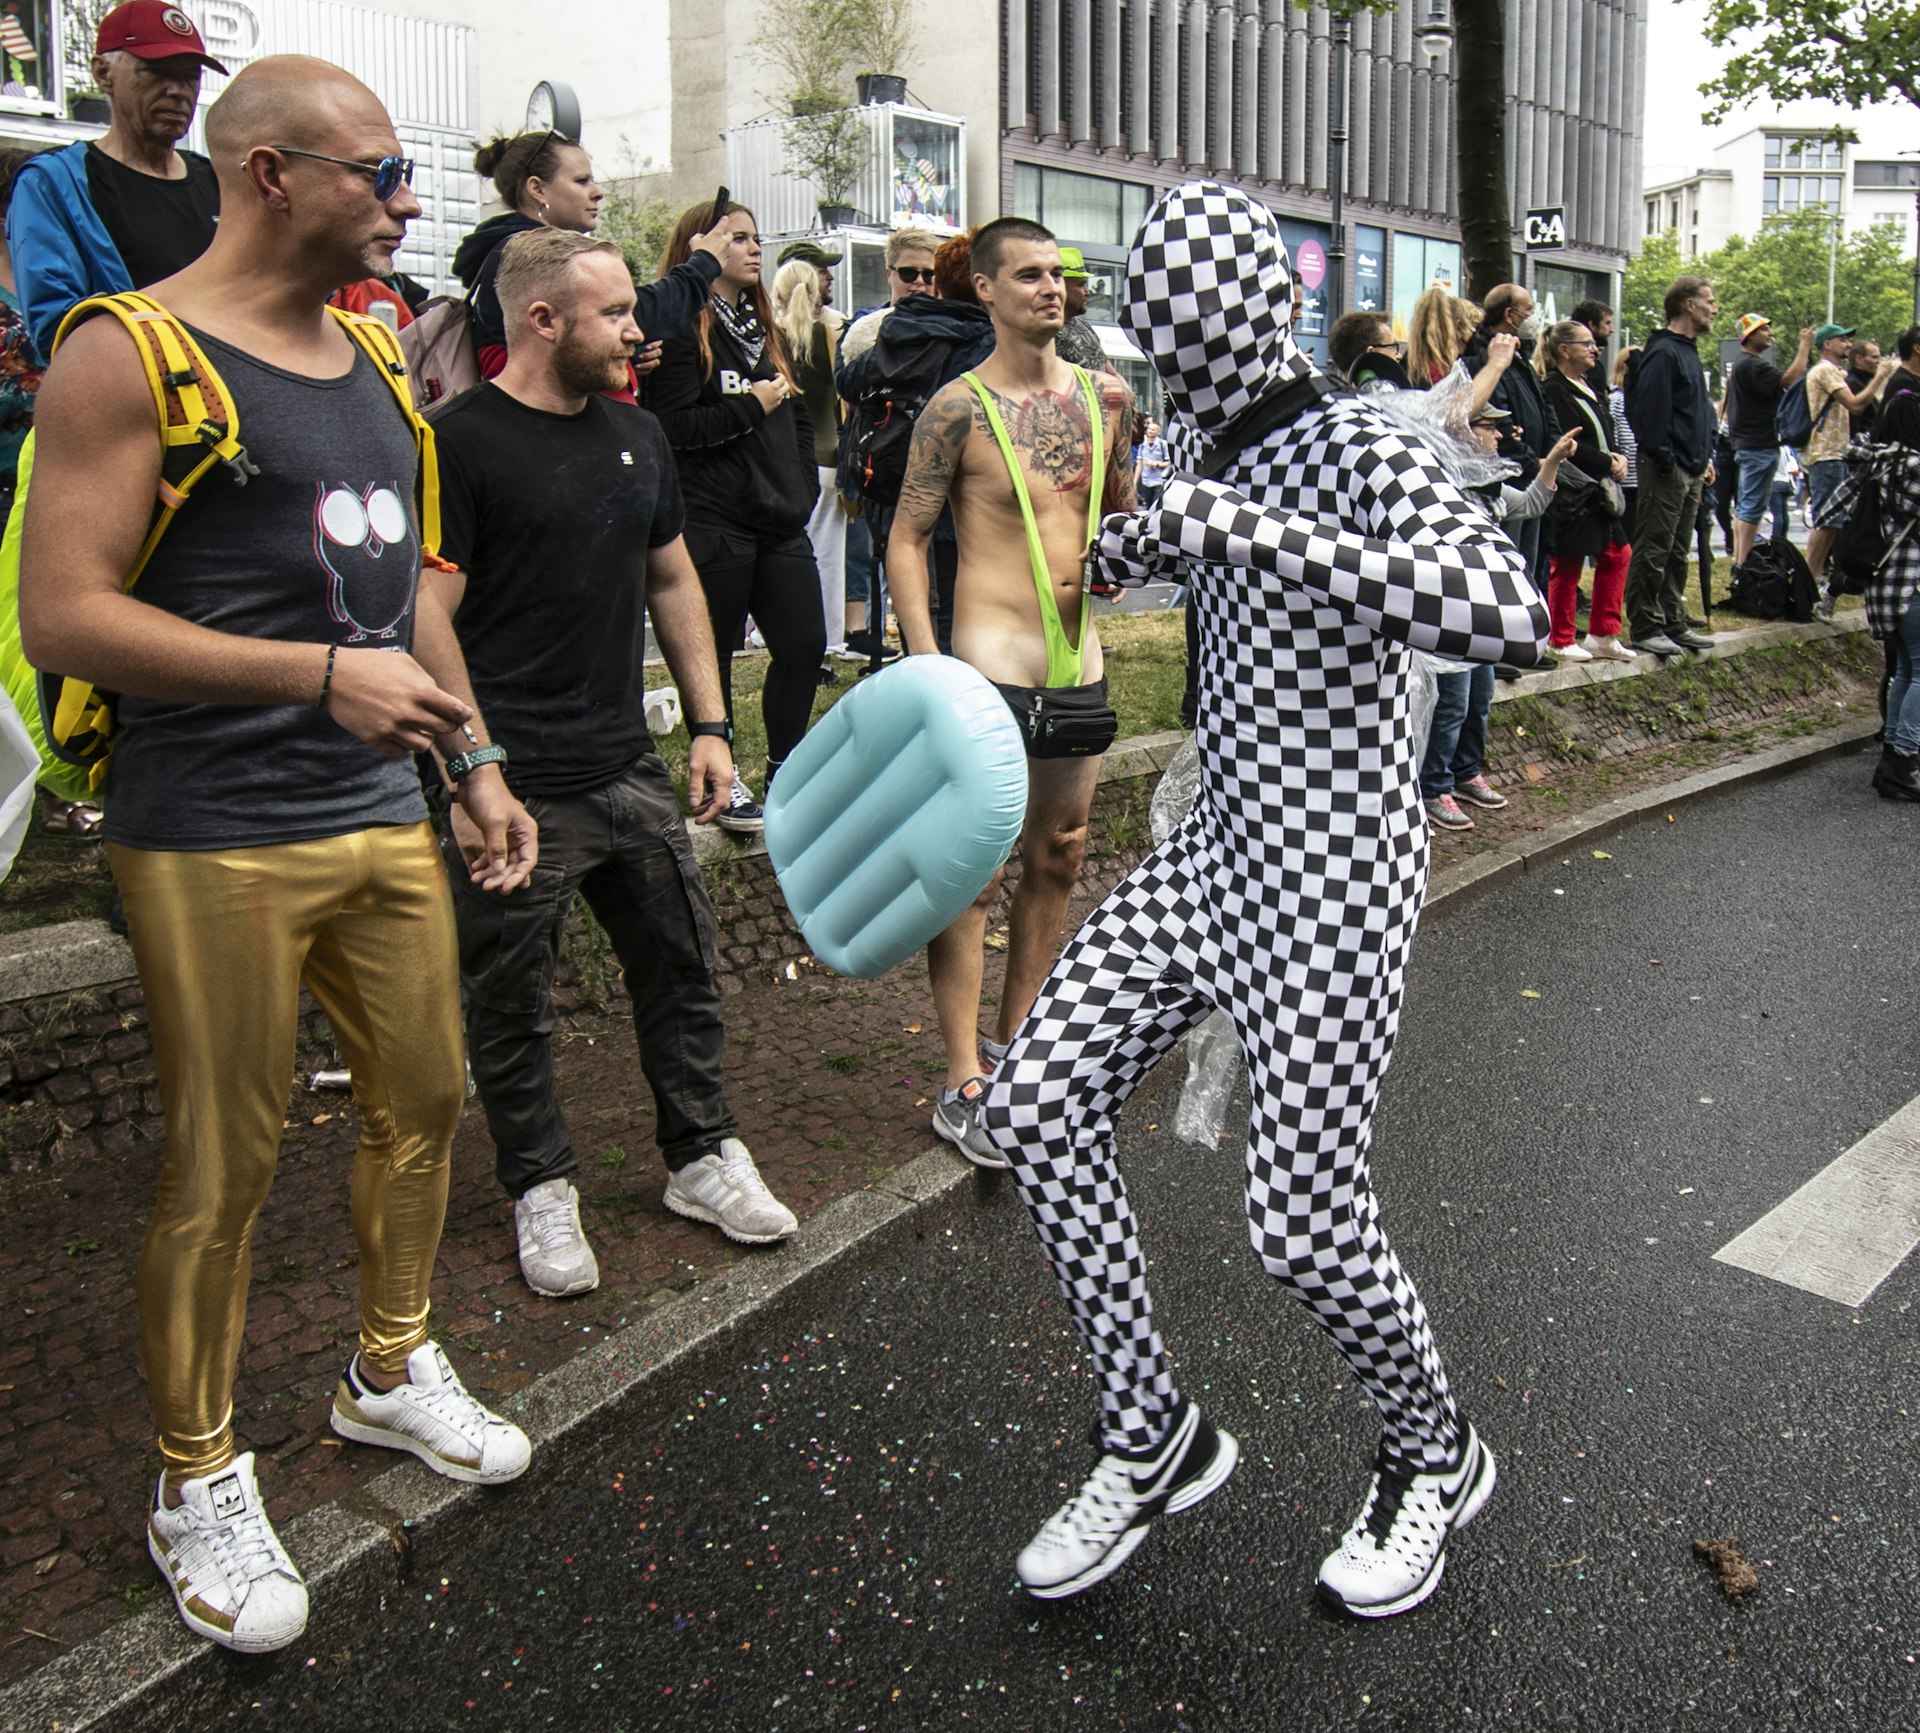 A man in a checkered suit and mask dances with others at Rave the Planet (Love Parade) 2022, Berlin, Germany